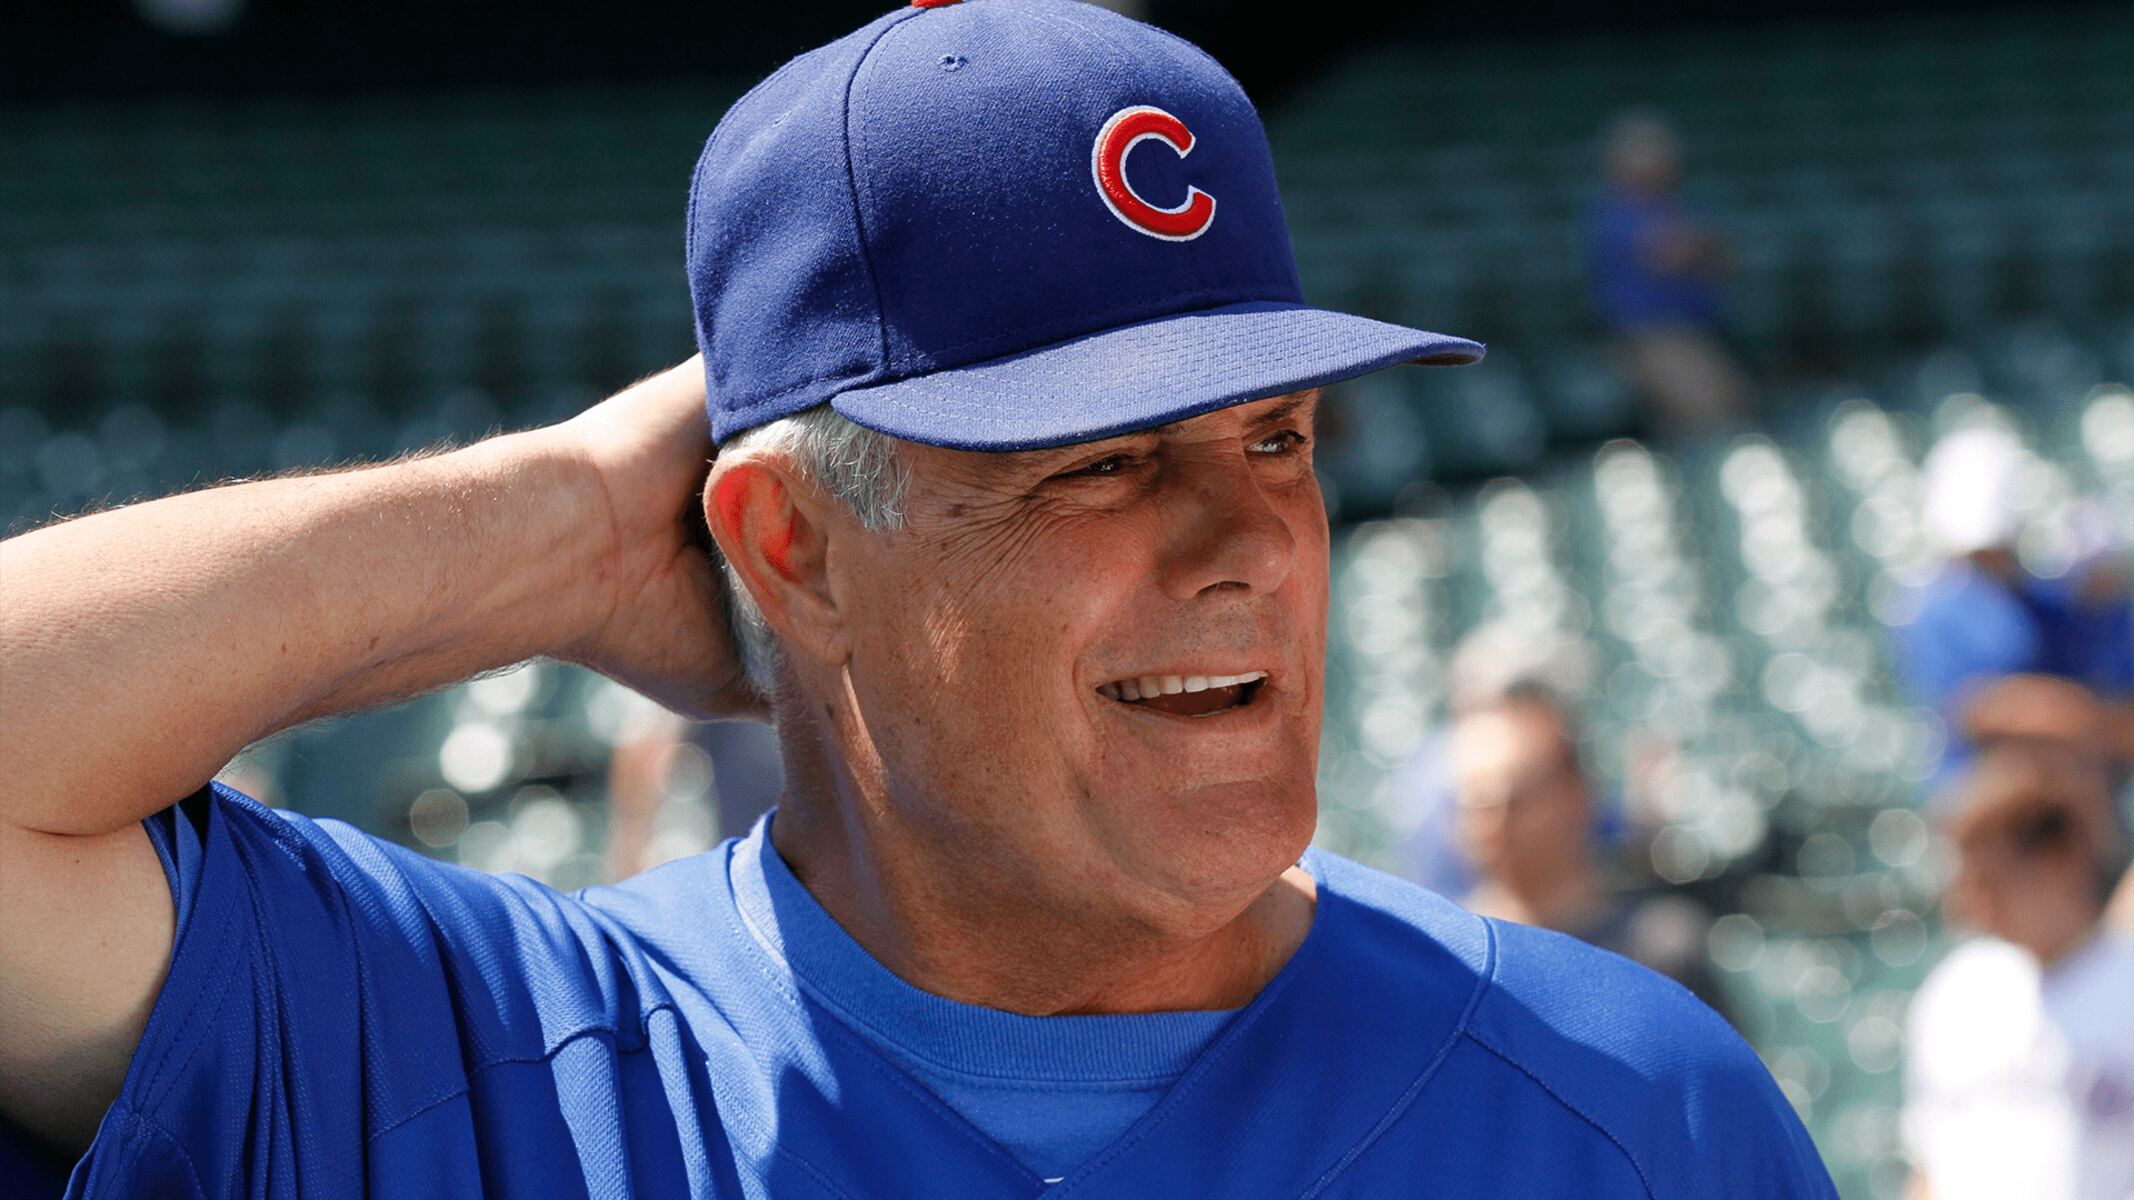 Former M's manager Lou Piniella retiring after season